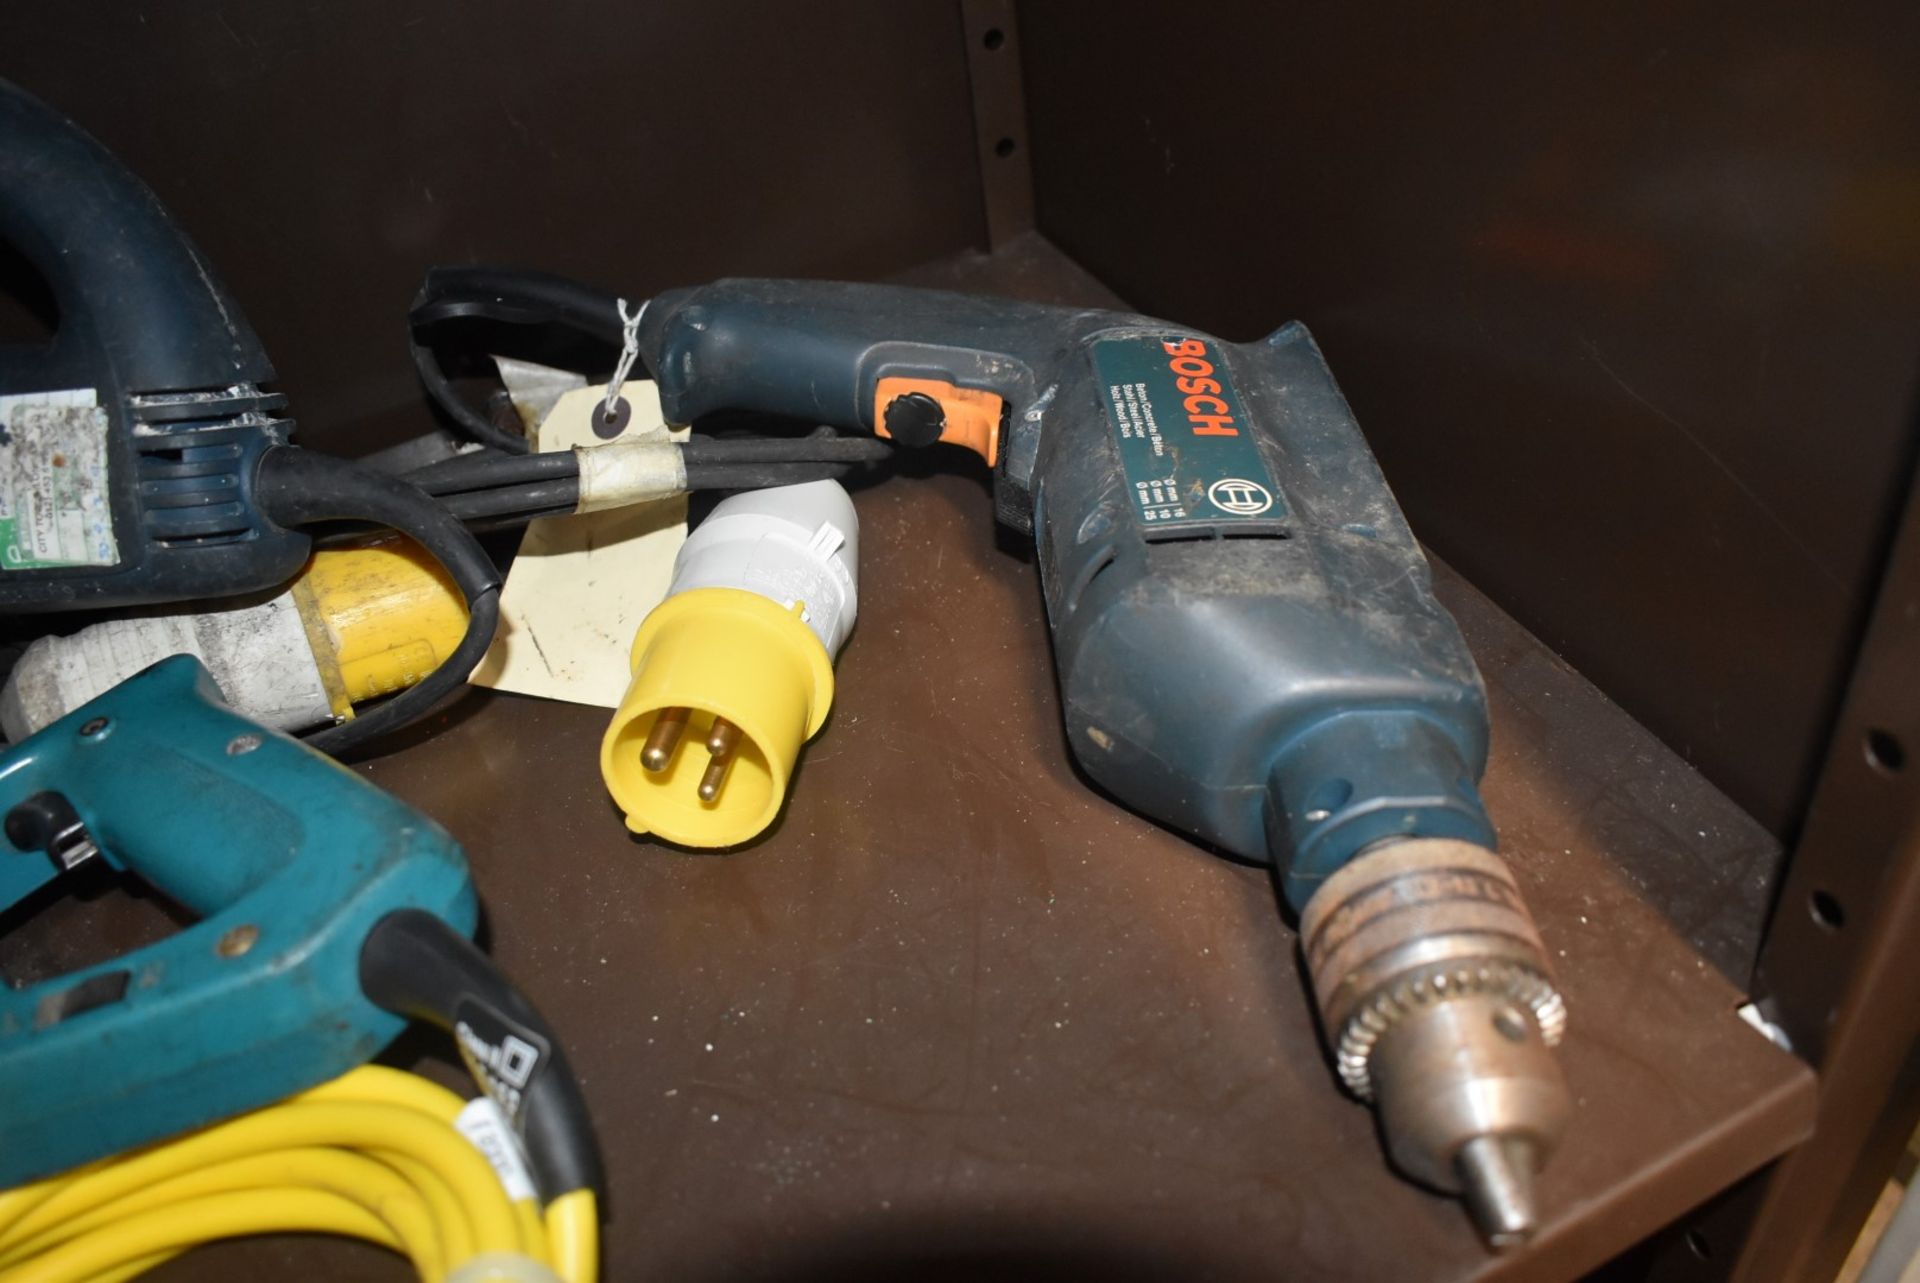 5 x Power Tools Including Saw and Drills - 110v - Image 8 of 8